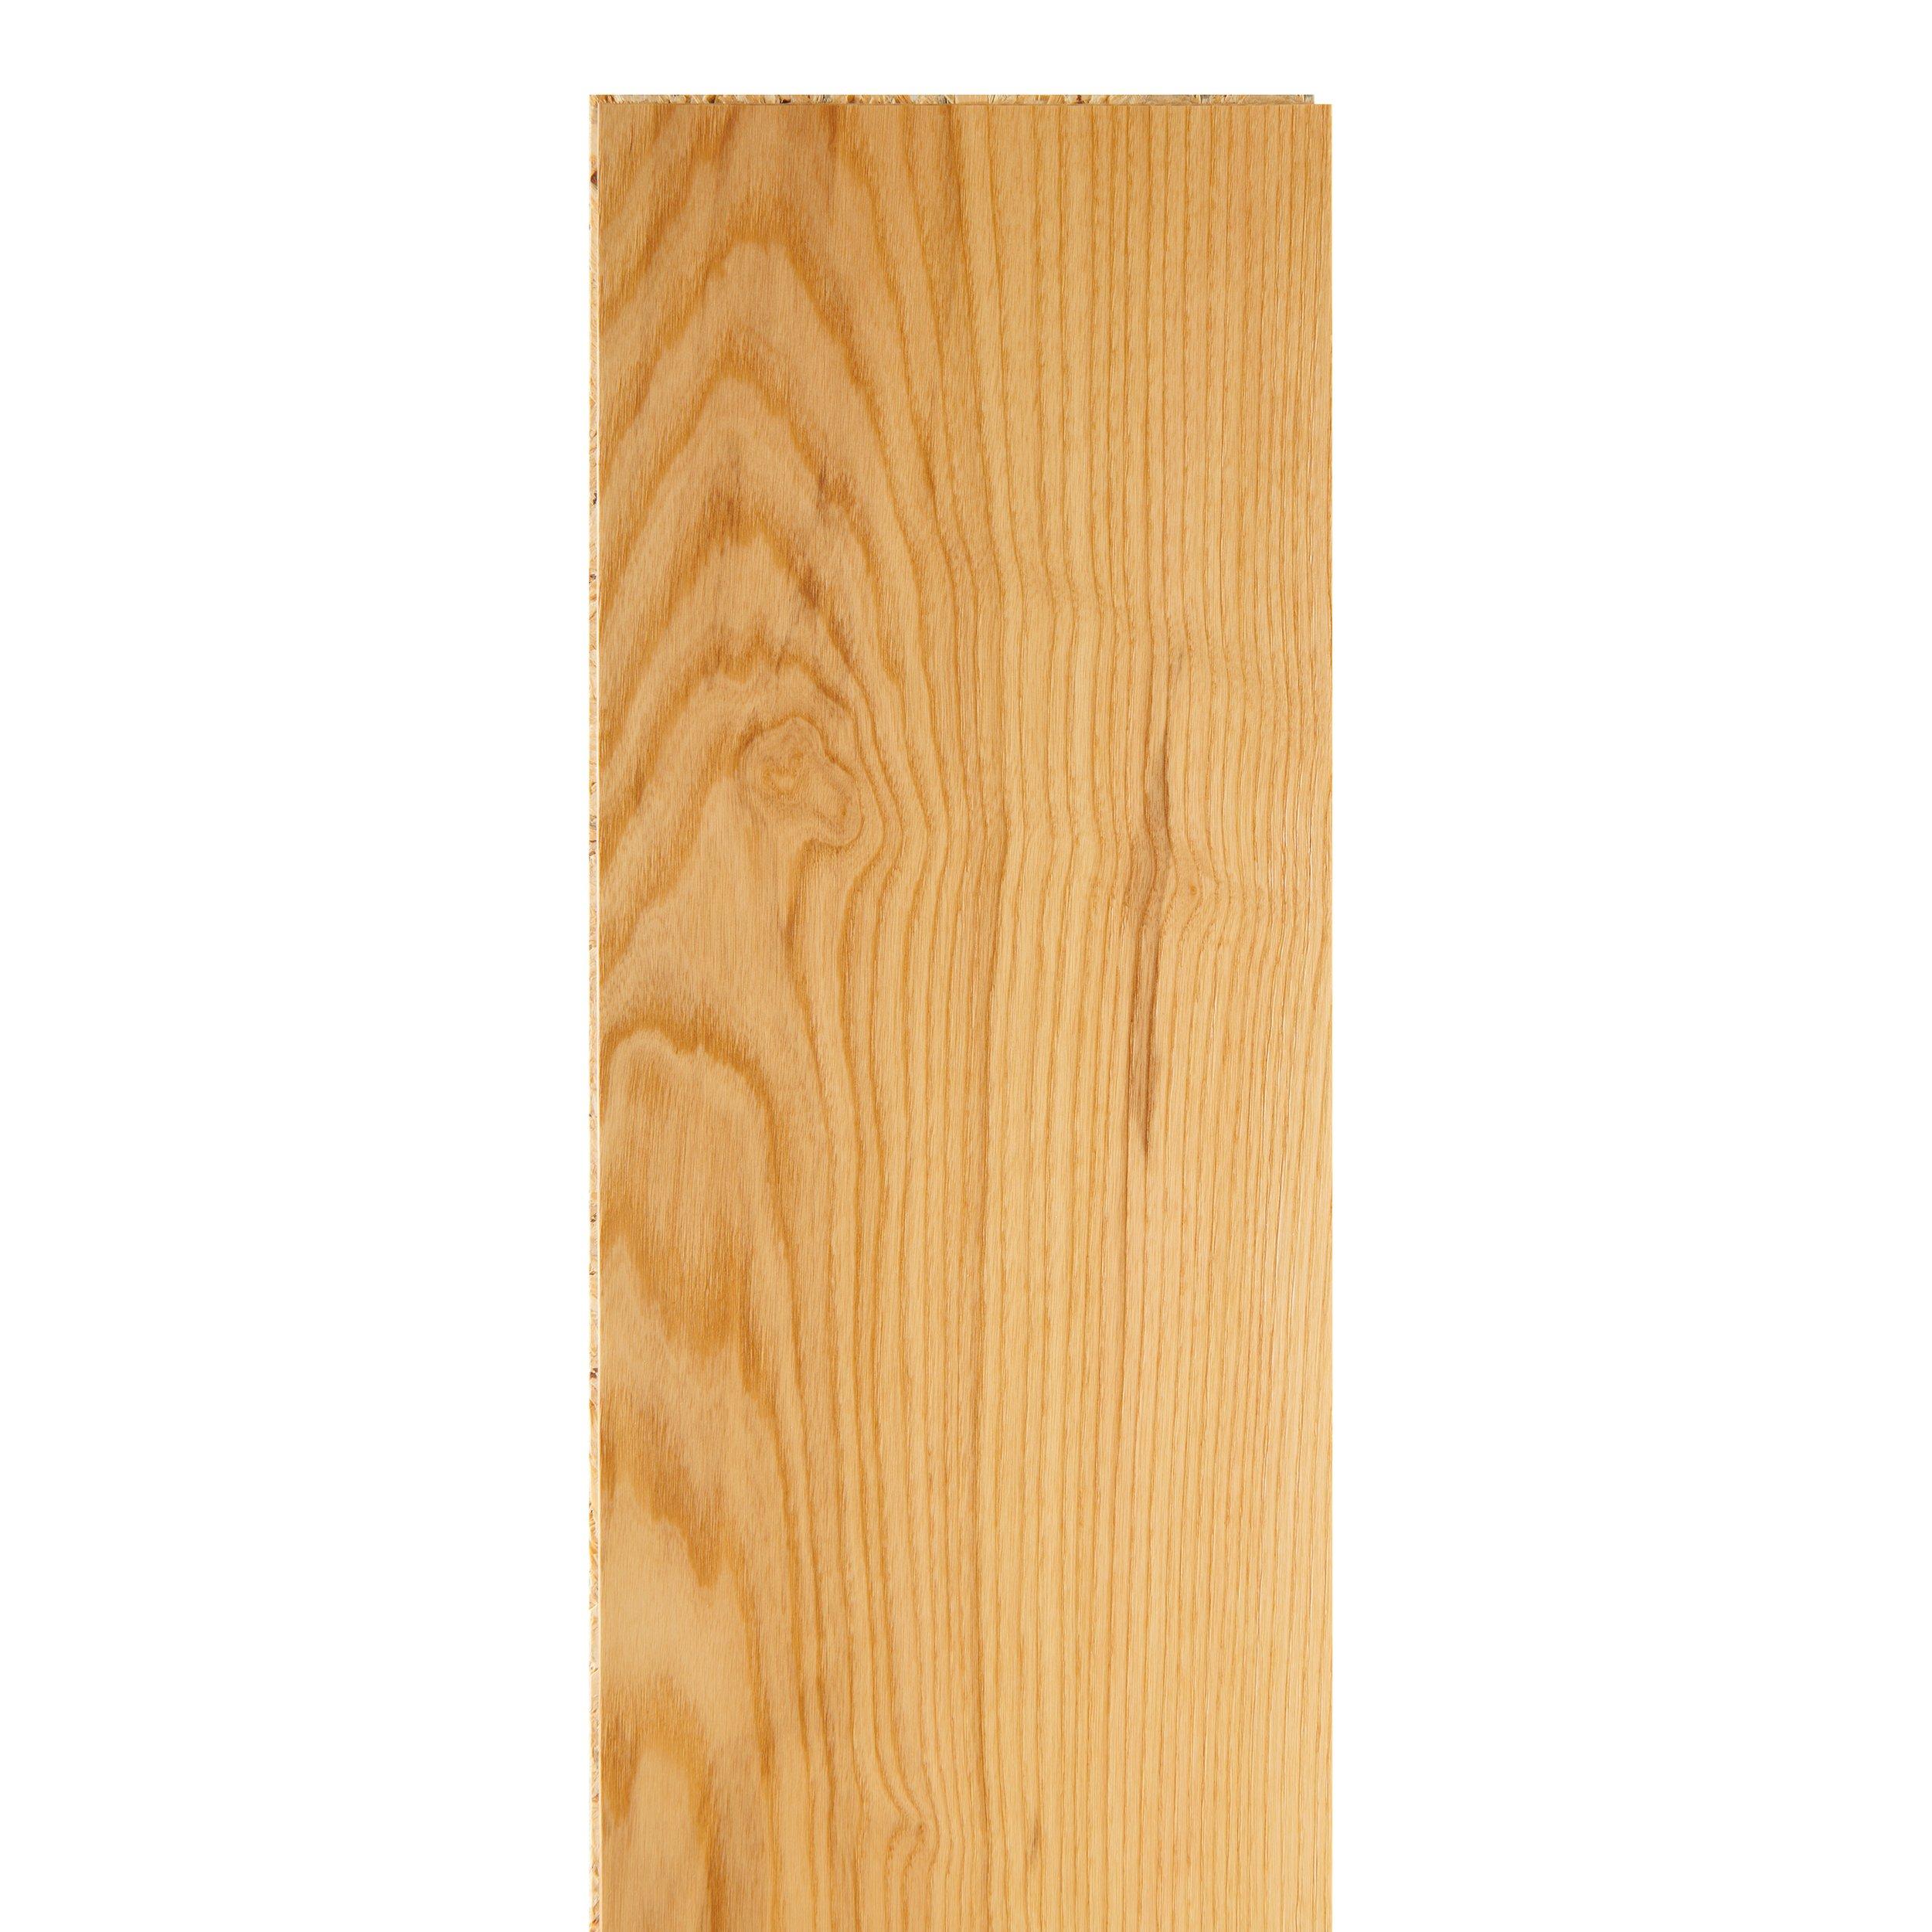 Airedale Ash Wire-Brushed Engineered Hardwood